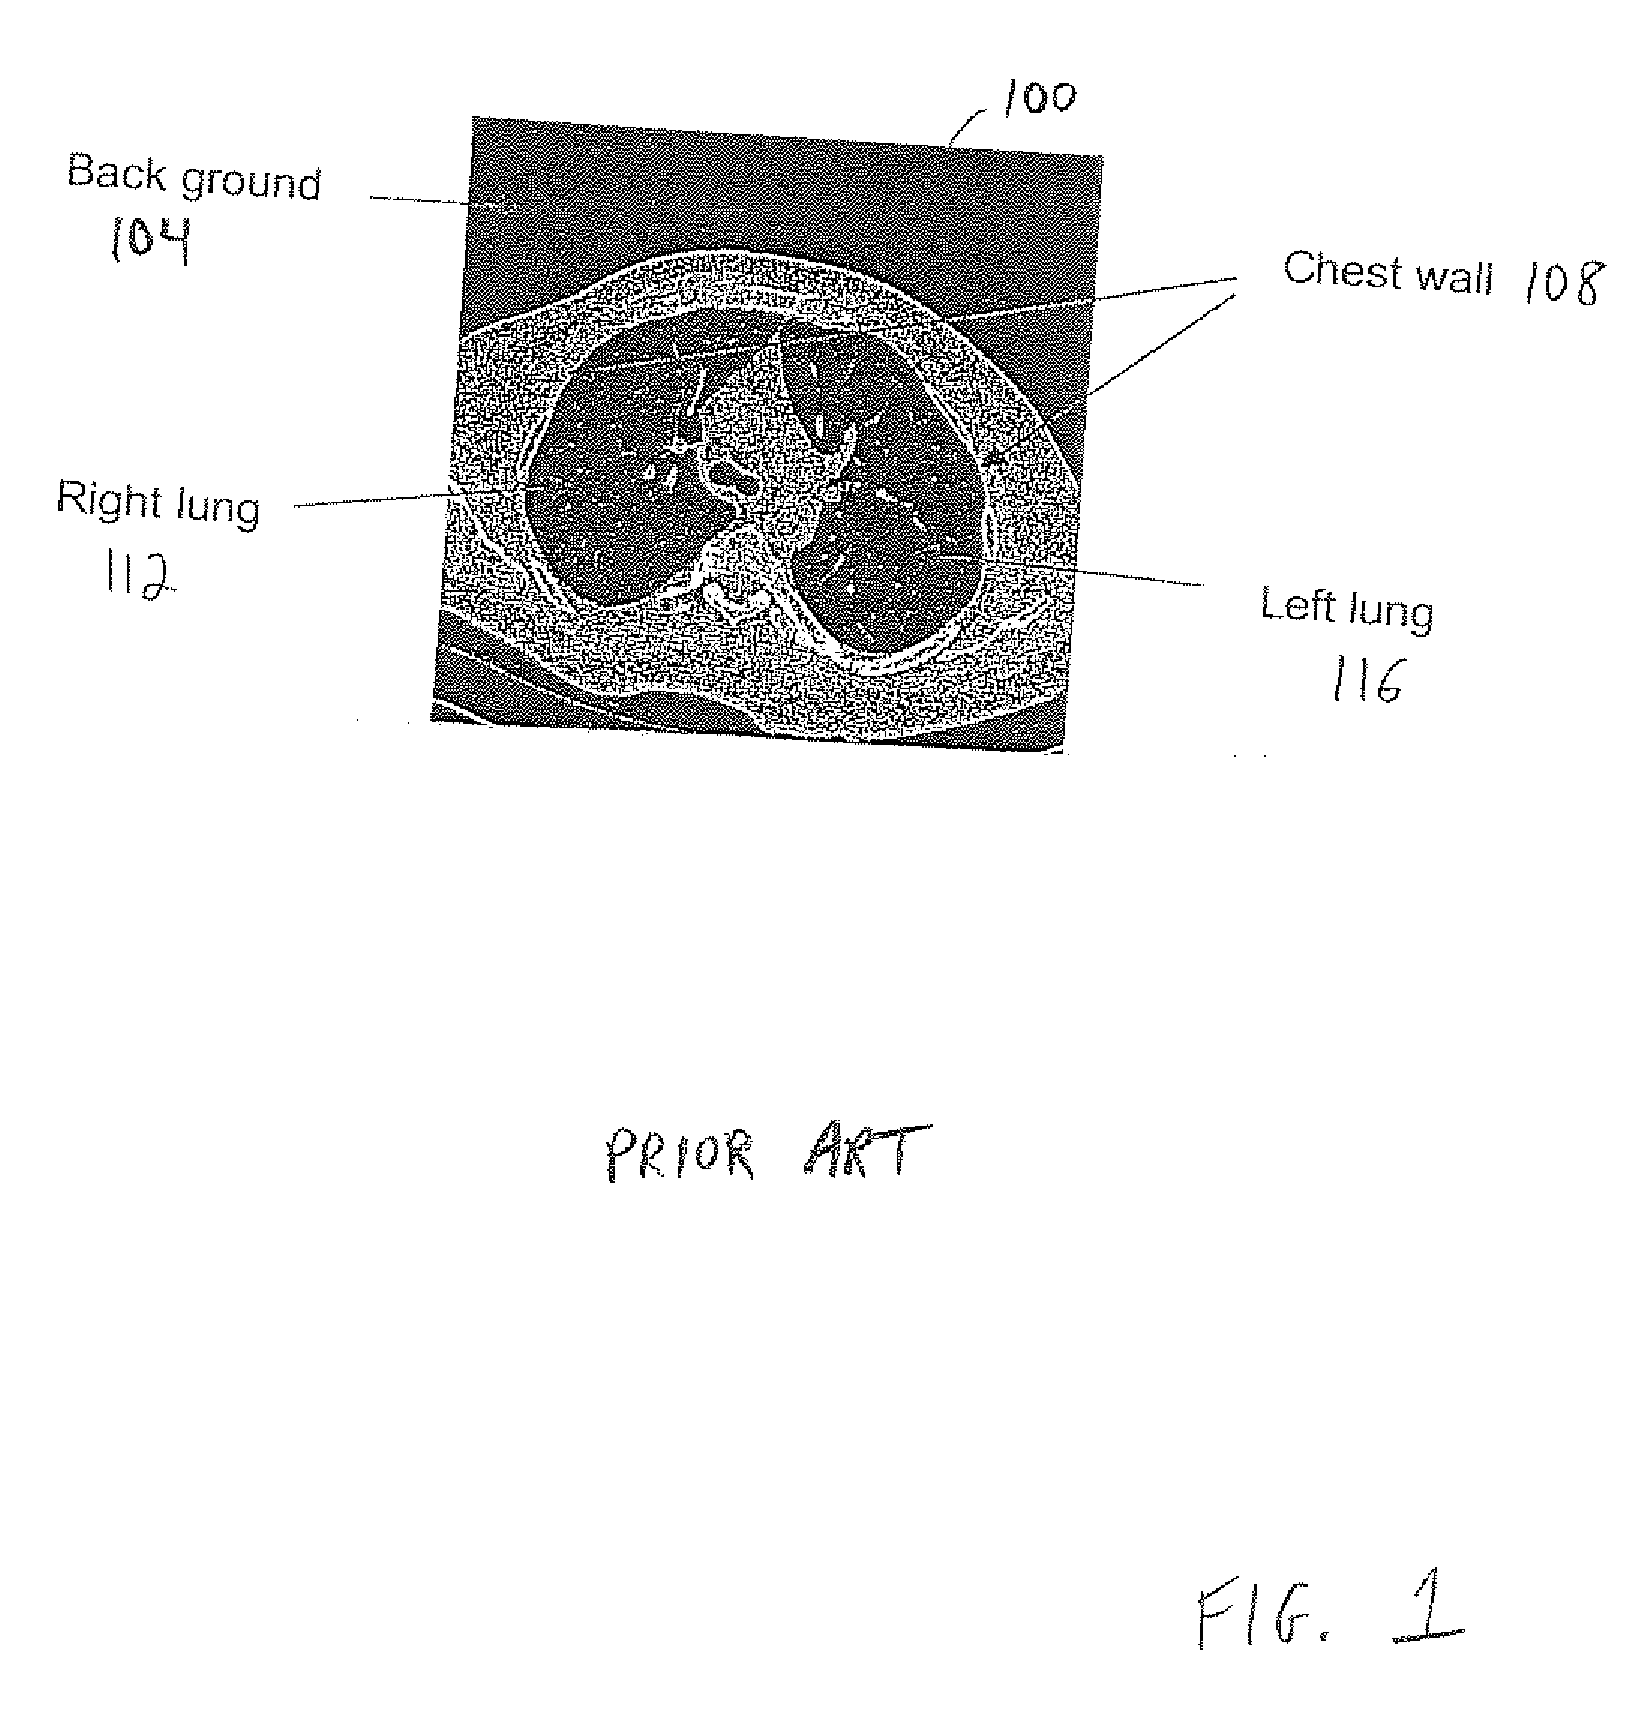 Method and System for Automatic Lung Segmentation